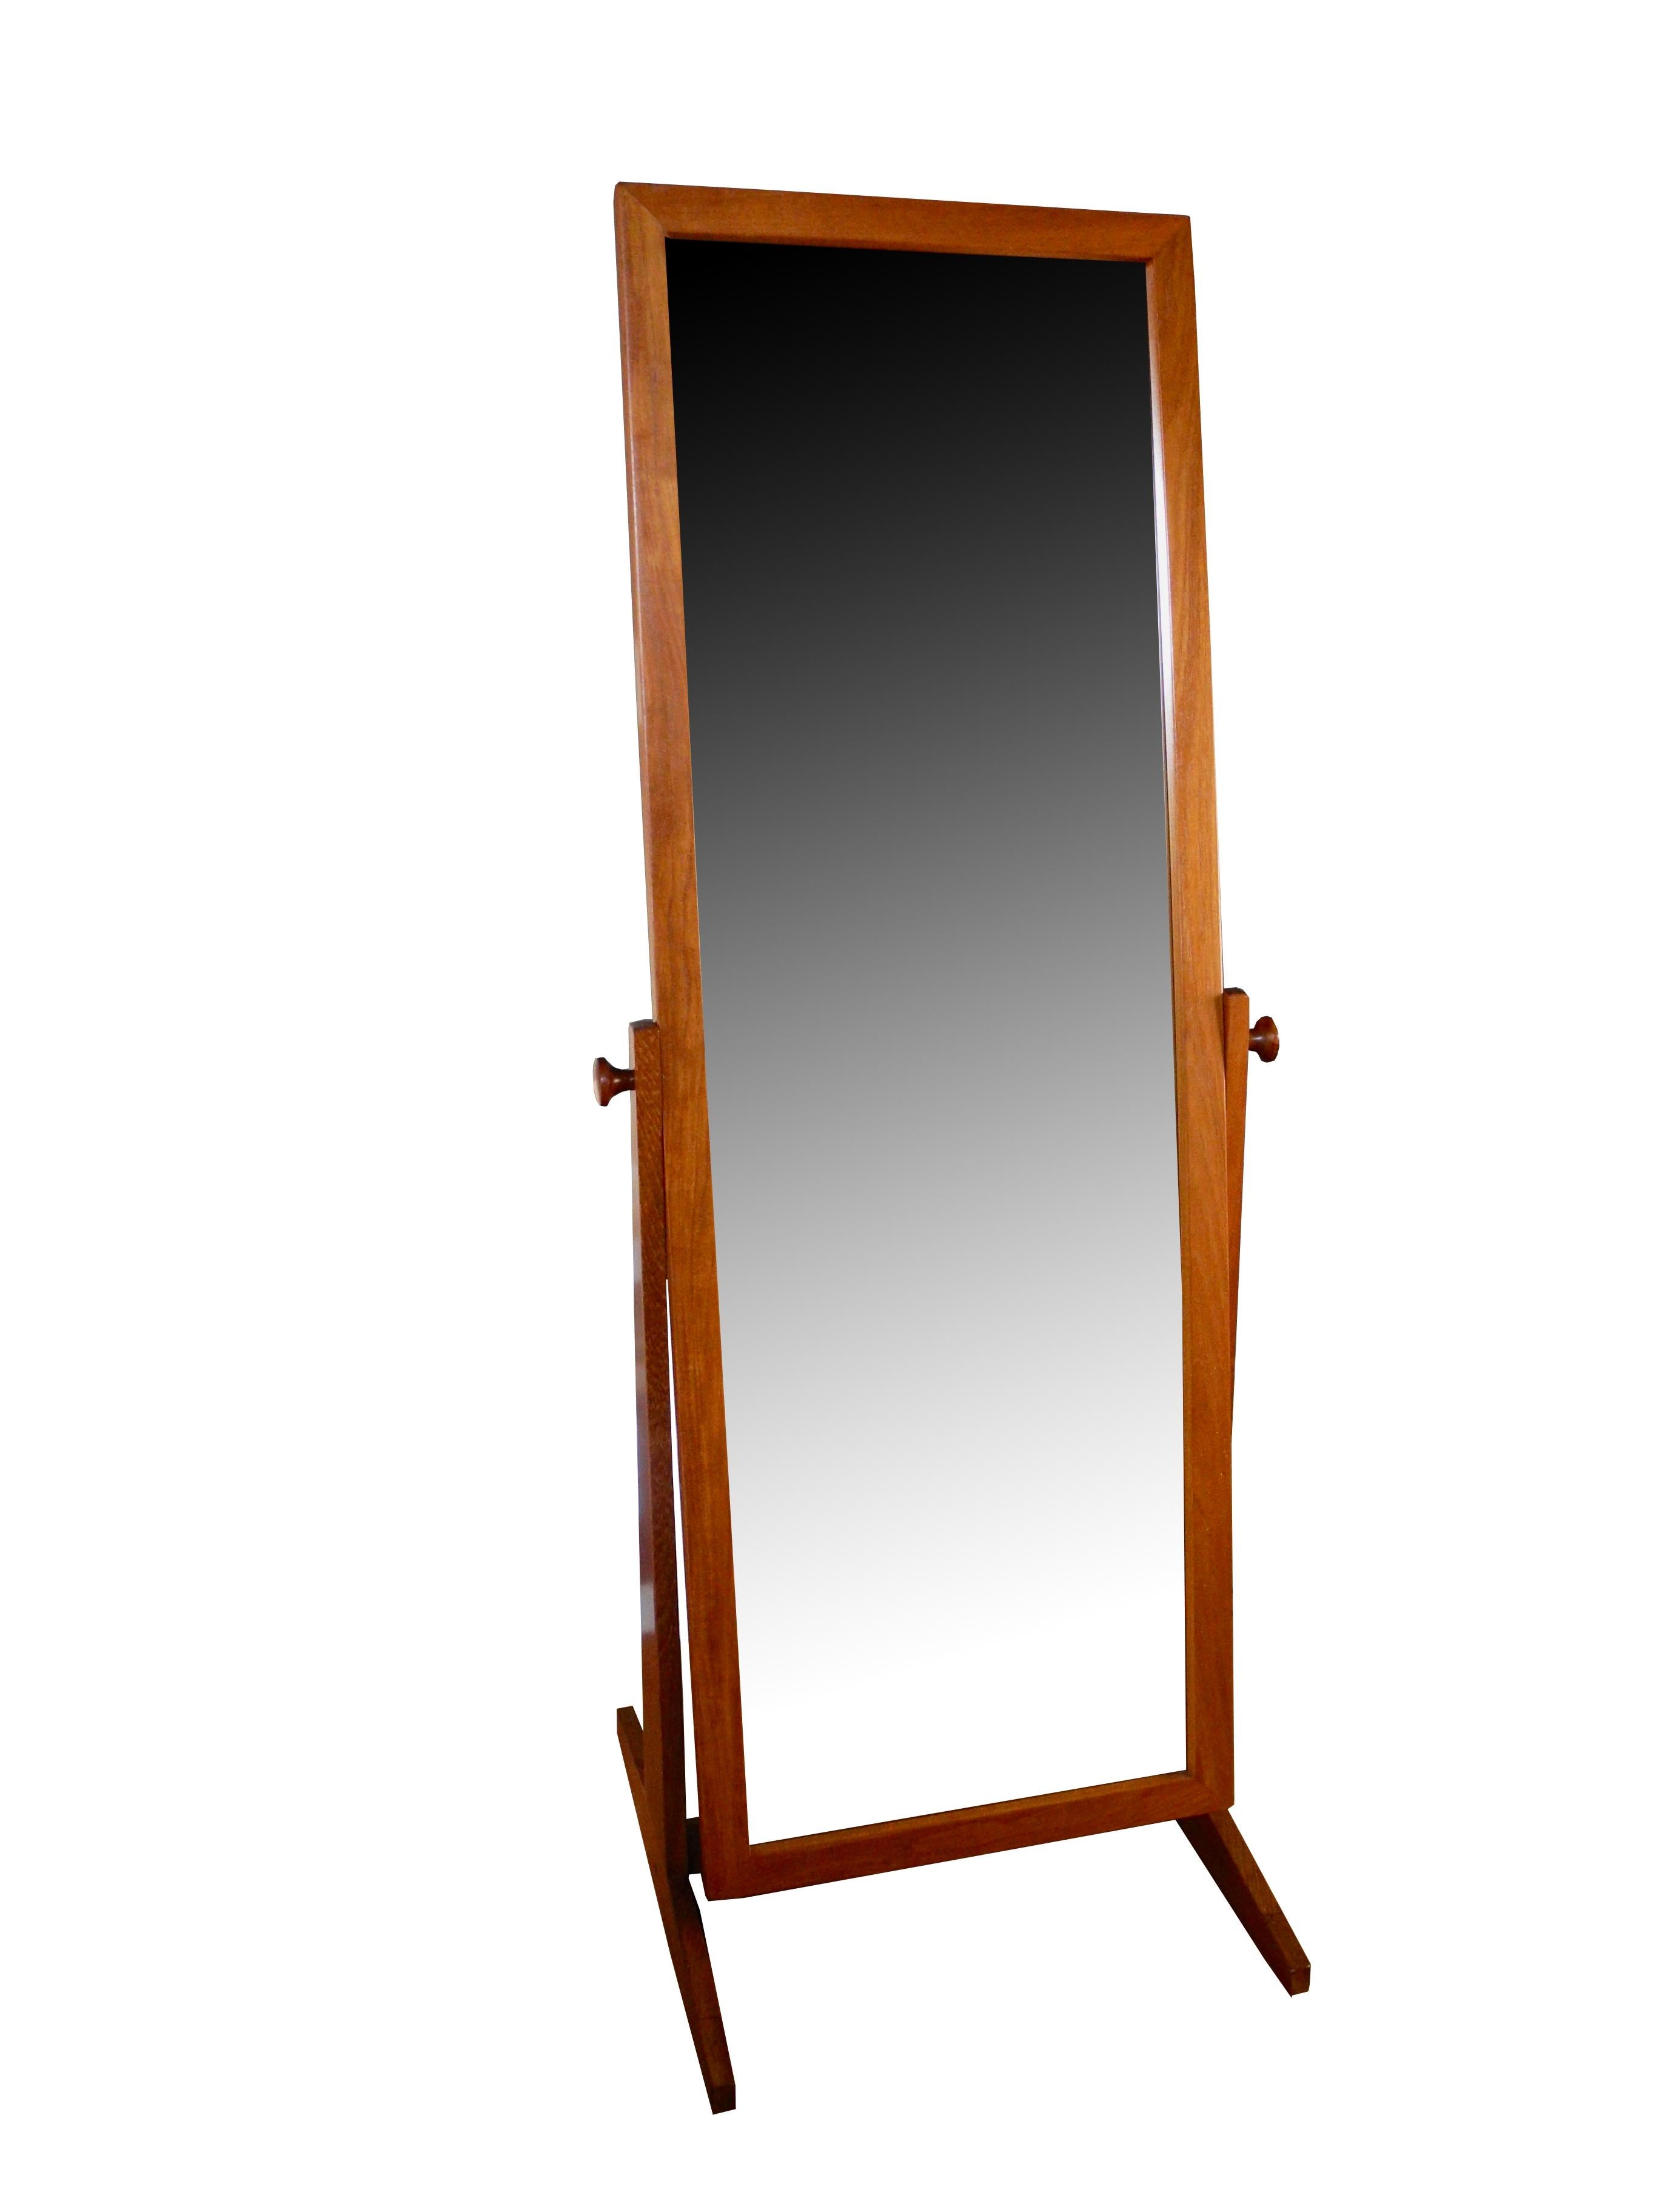 This adjustable 1960s floor mirror stands on its own and is an attractive element in any bedroom or dressing room. Made of teak in Denmark by Pedersen & Hansen. The mirror measures 21 5/8 inches wide by 62 1/2 inches long. The mirror with the footed